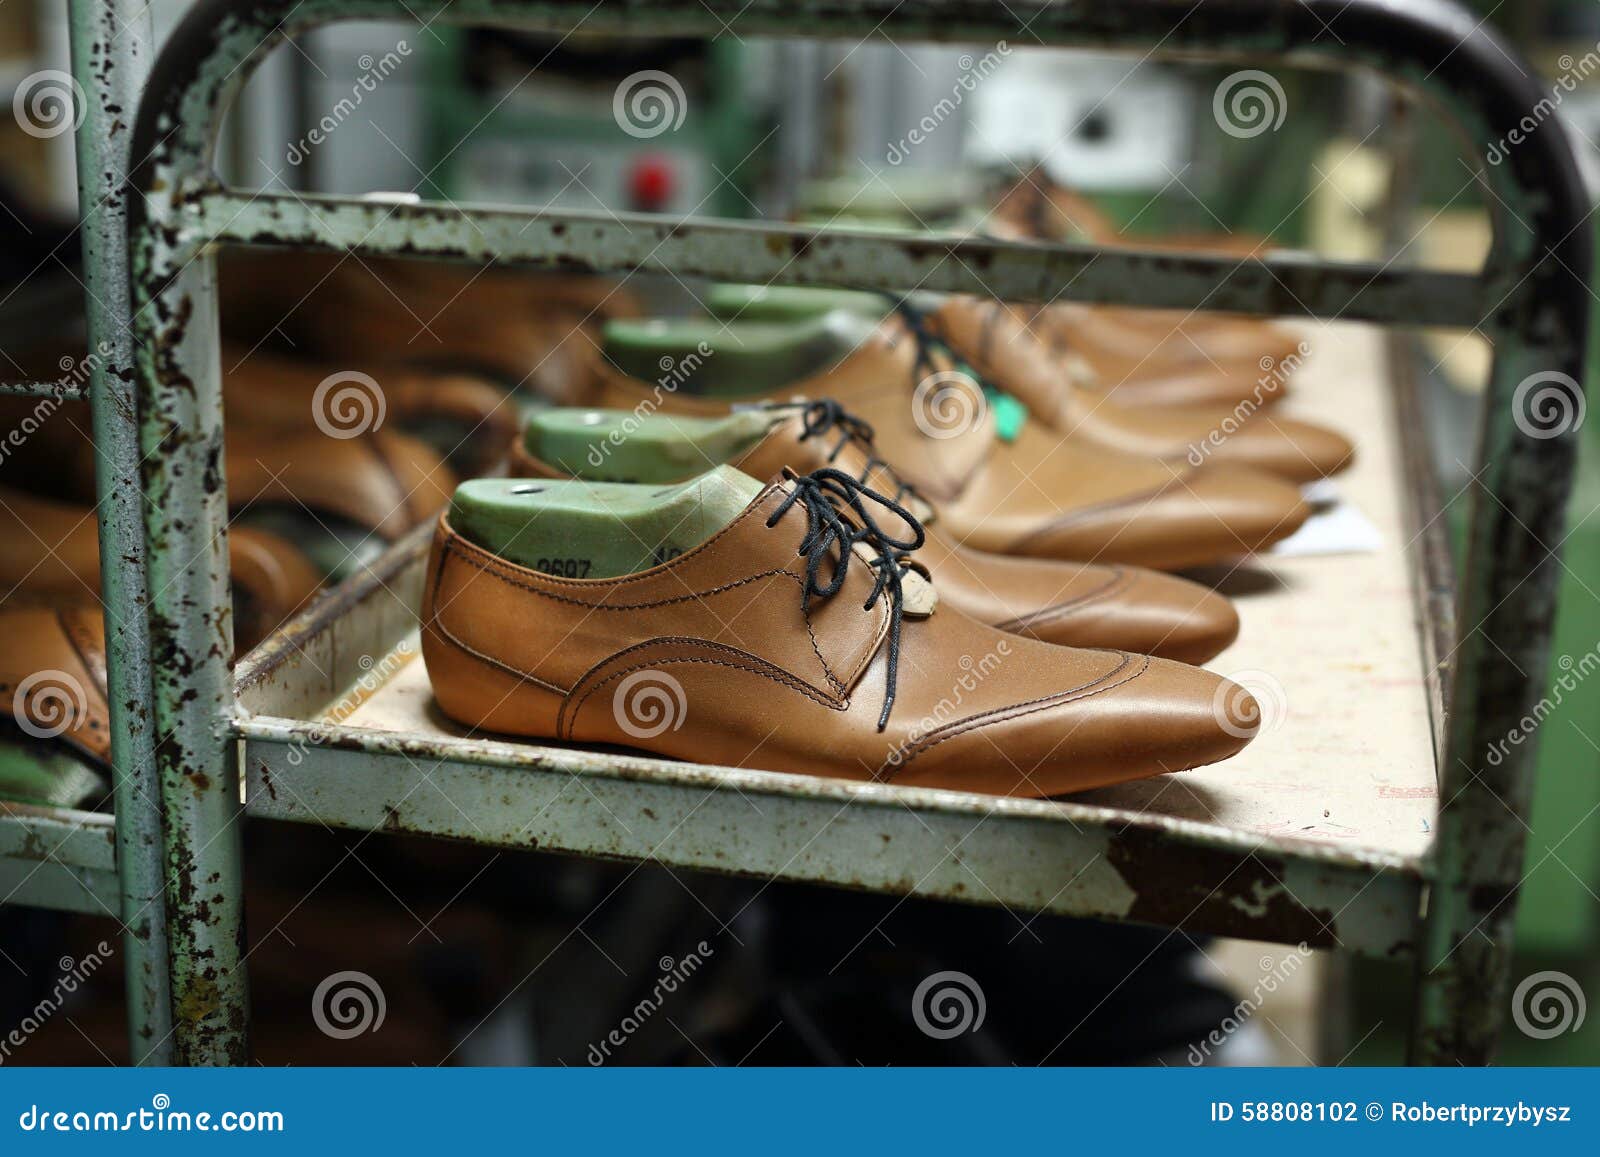 Elegant Men S Shoes Made To Measure Stock Photo Image Of Cobbler